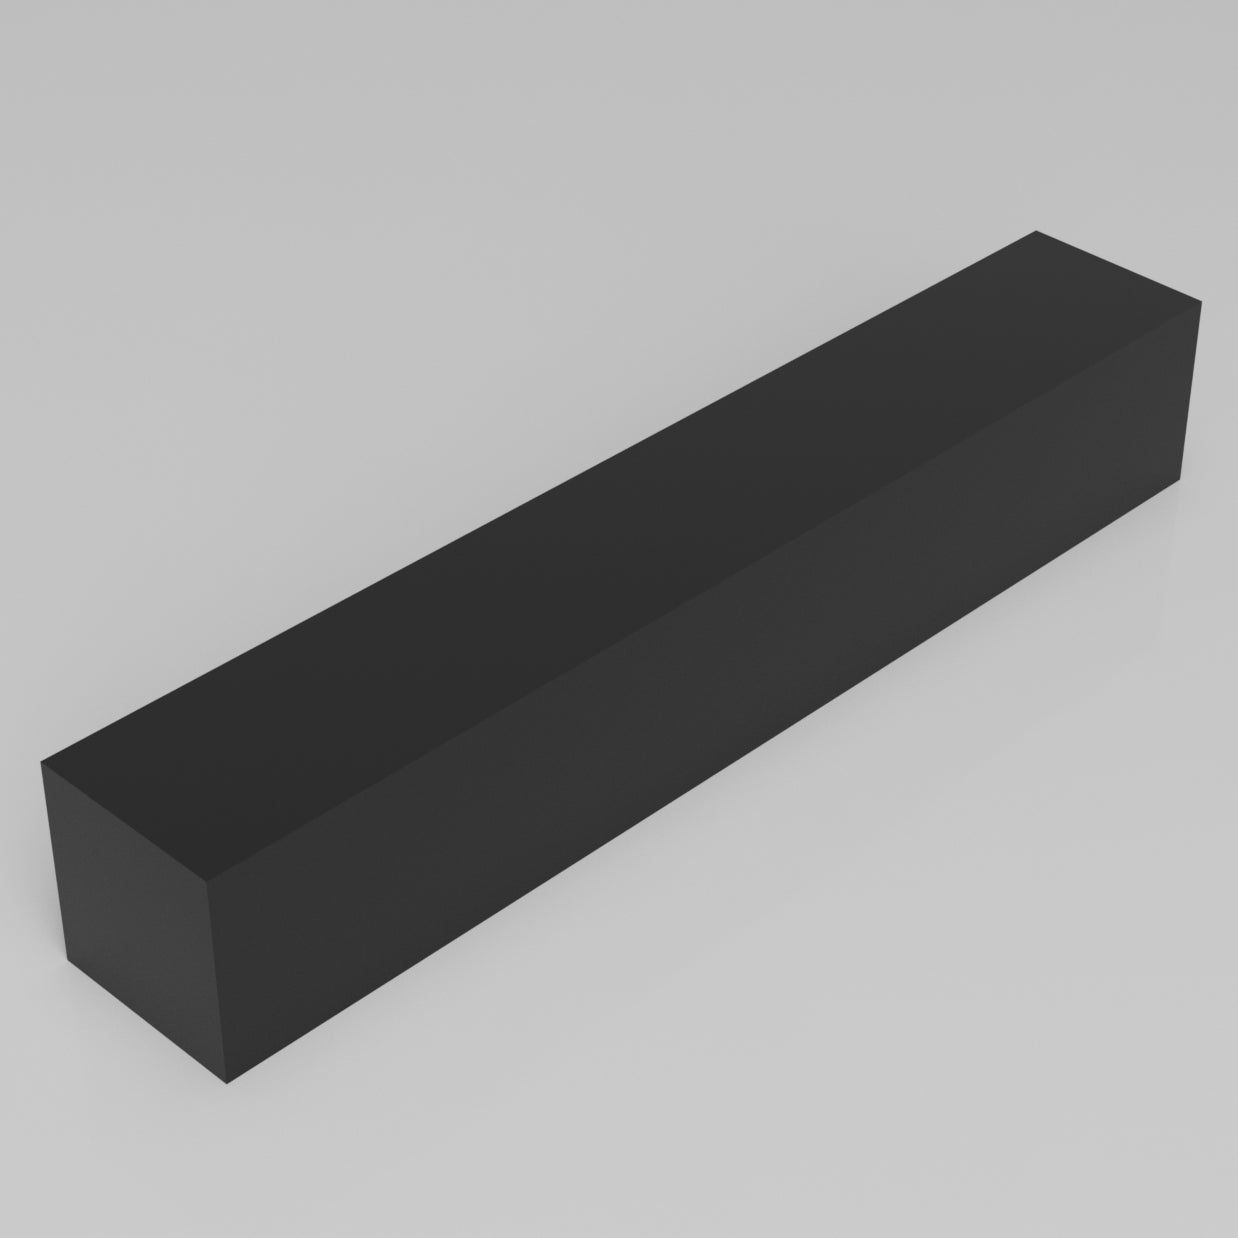 Machinable Wax Rectangular Block Front View 3 Inch by 3 Inch by 18 Inch